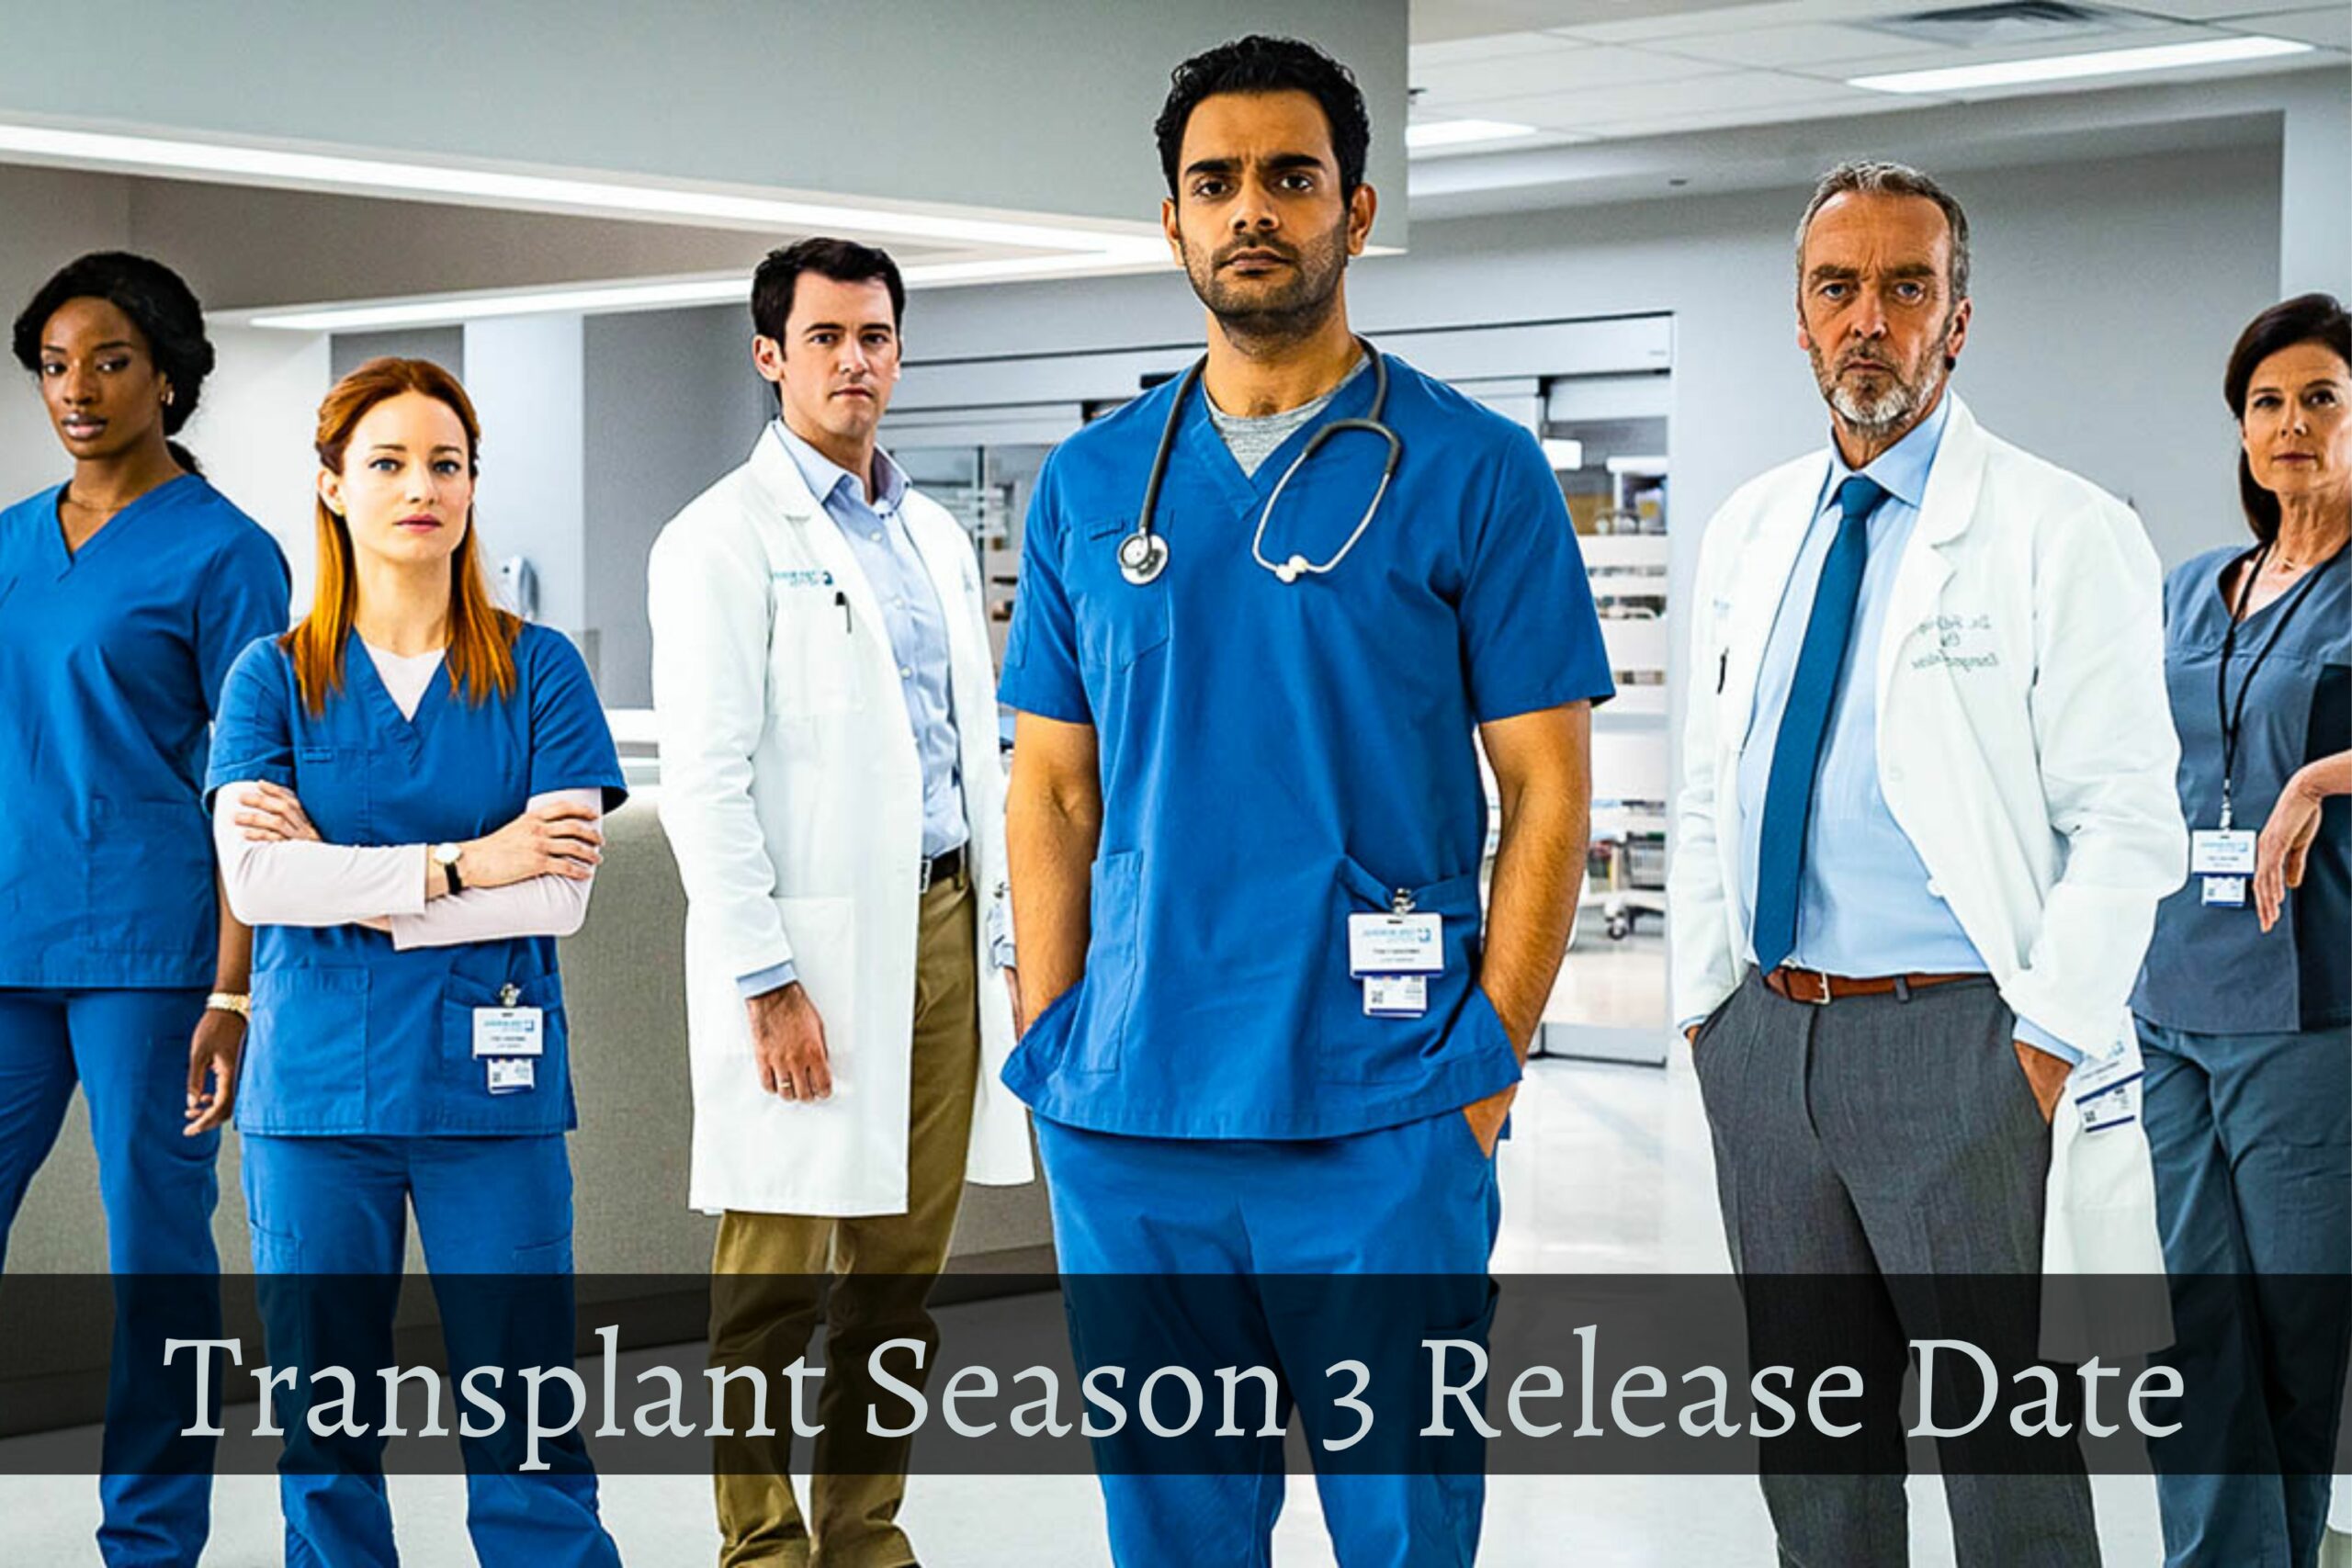 Transplant Season 3 Release Date Status, Storyline And Who Will Be In The Cast?